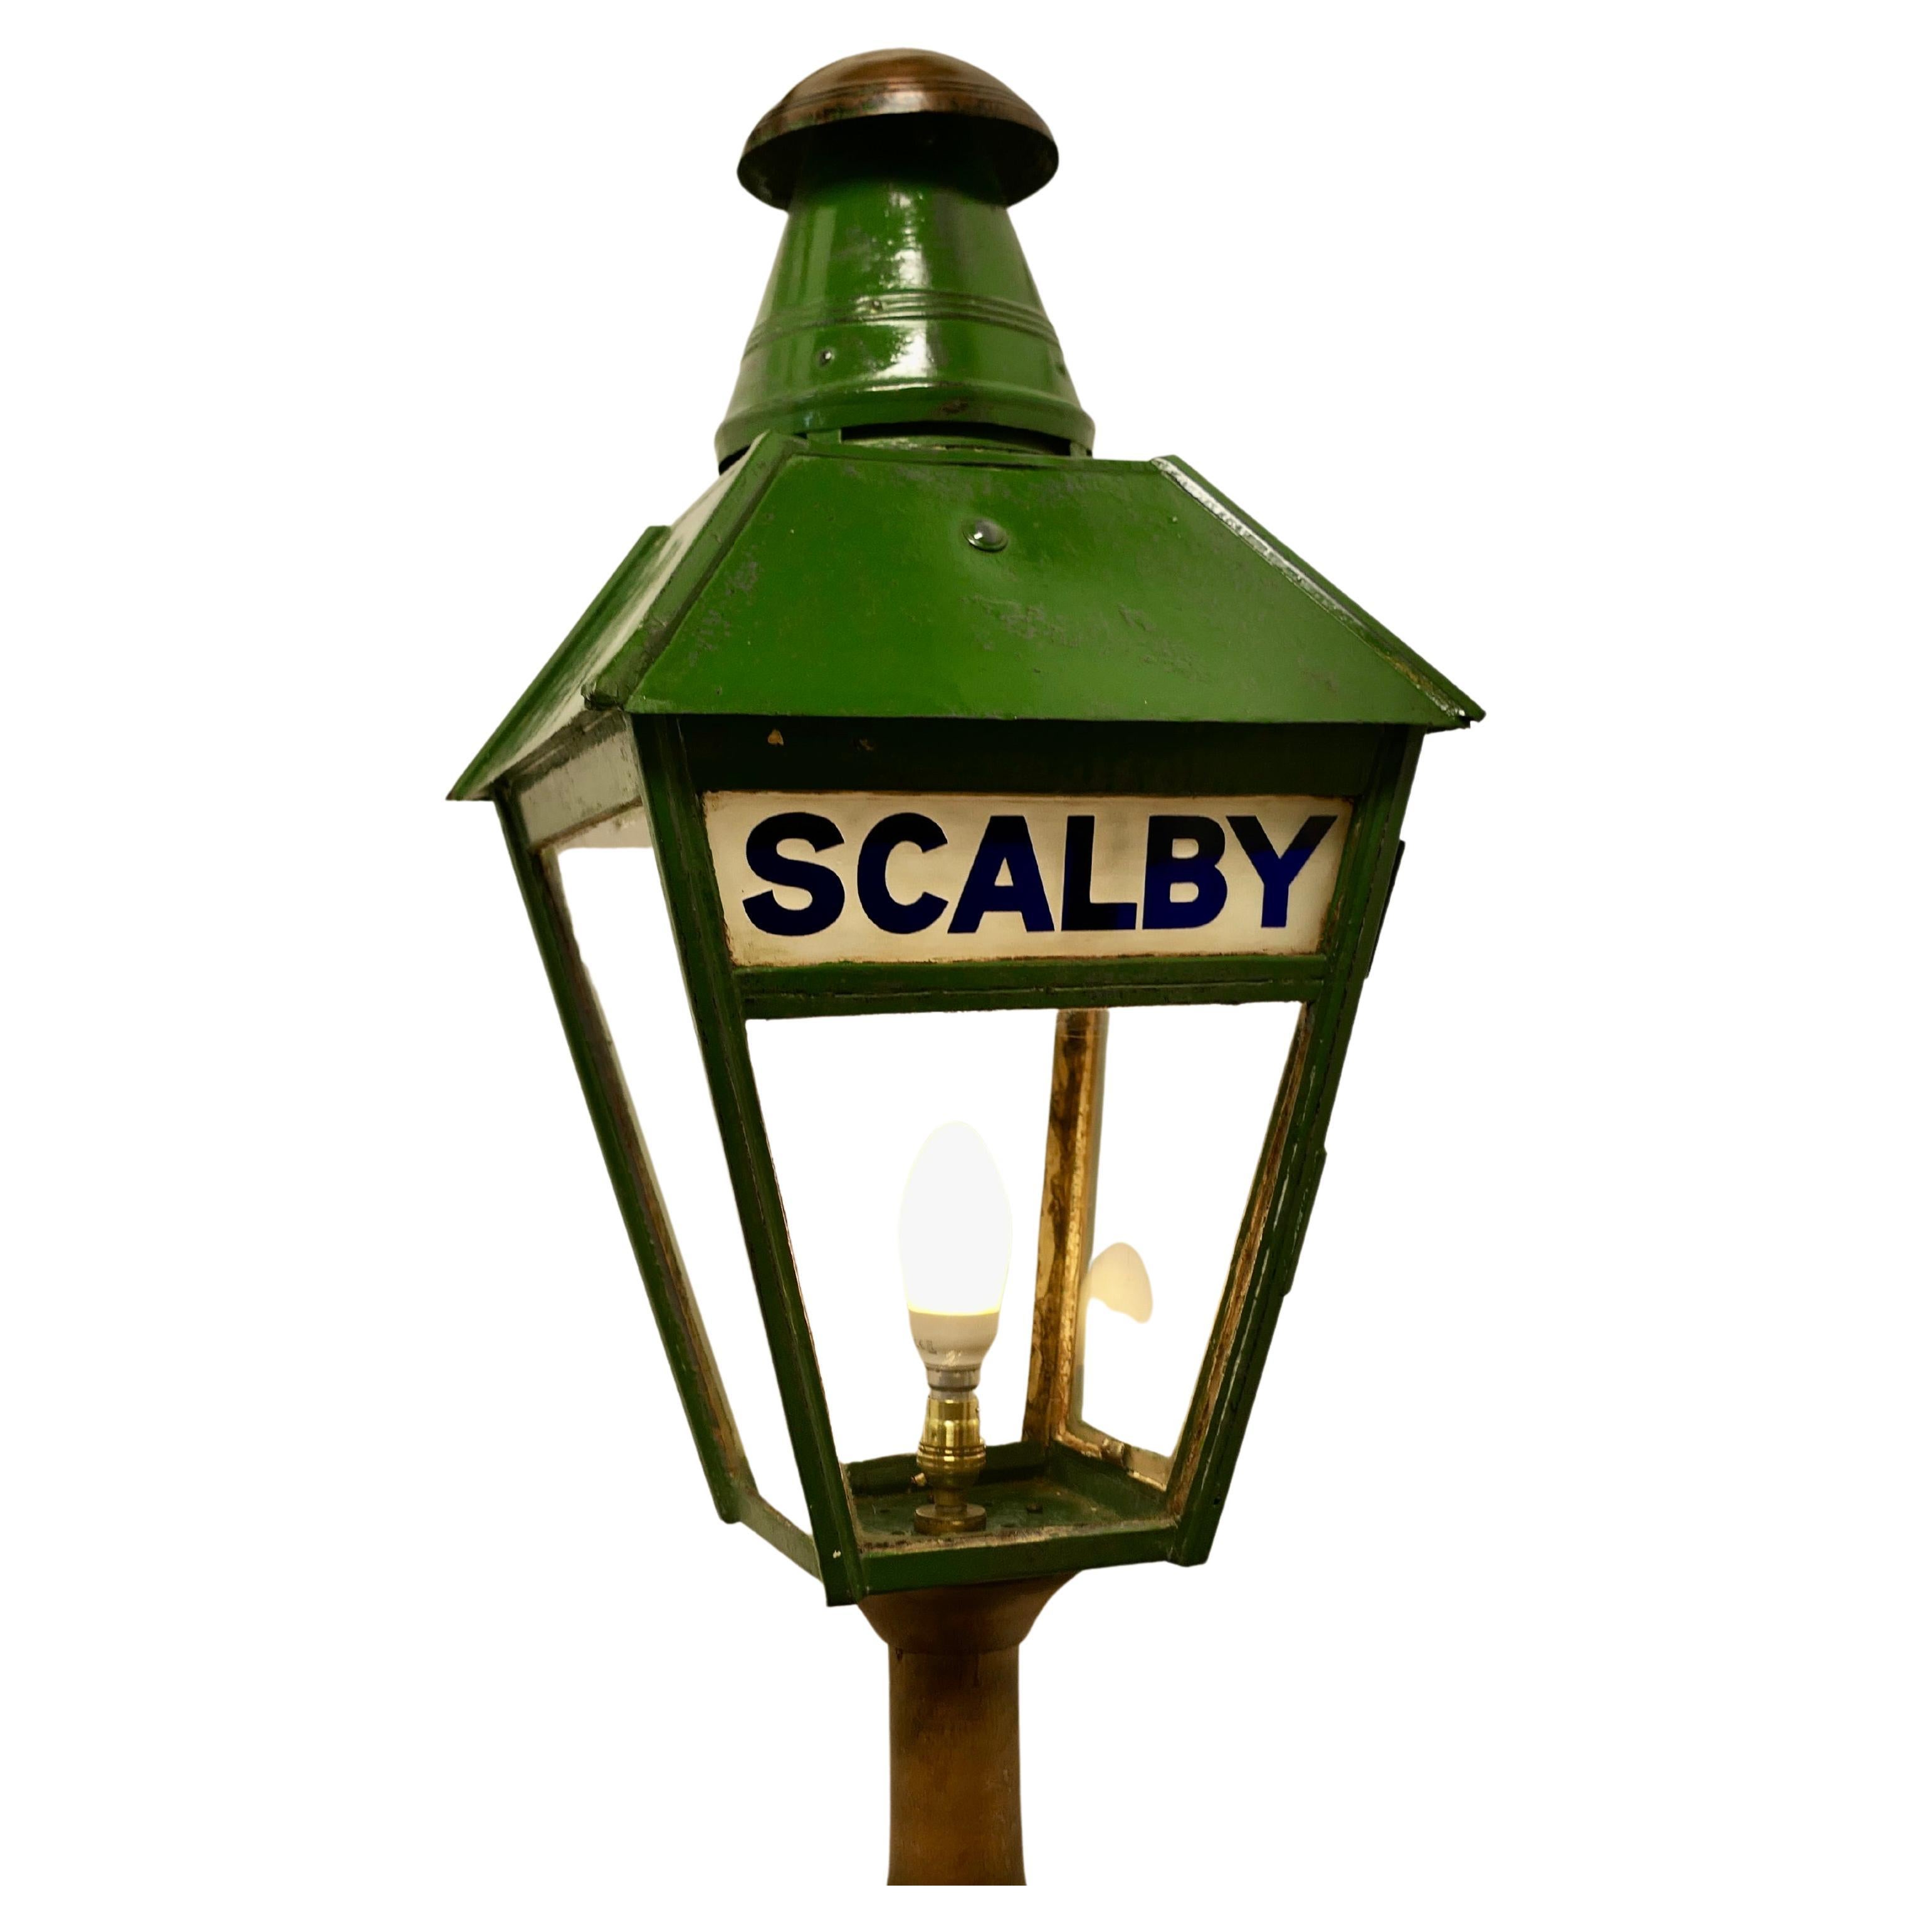 Floor Lamp Lantern from Scalby Station N.E.R. set on a Column    For Sale